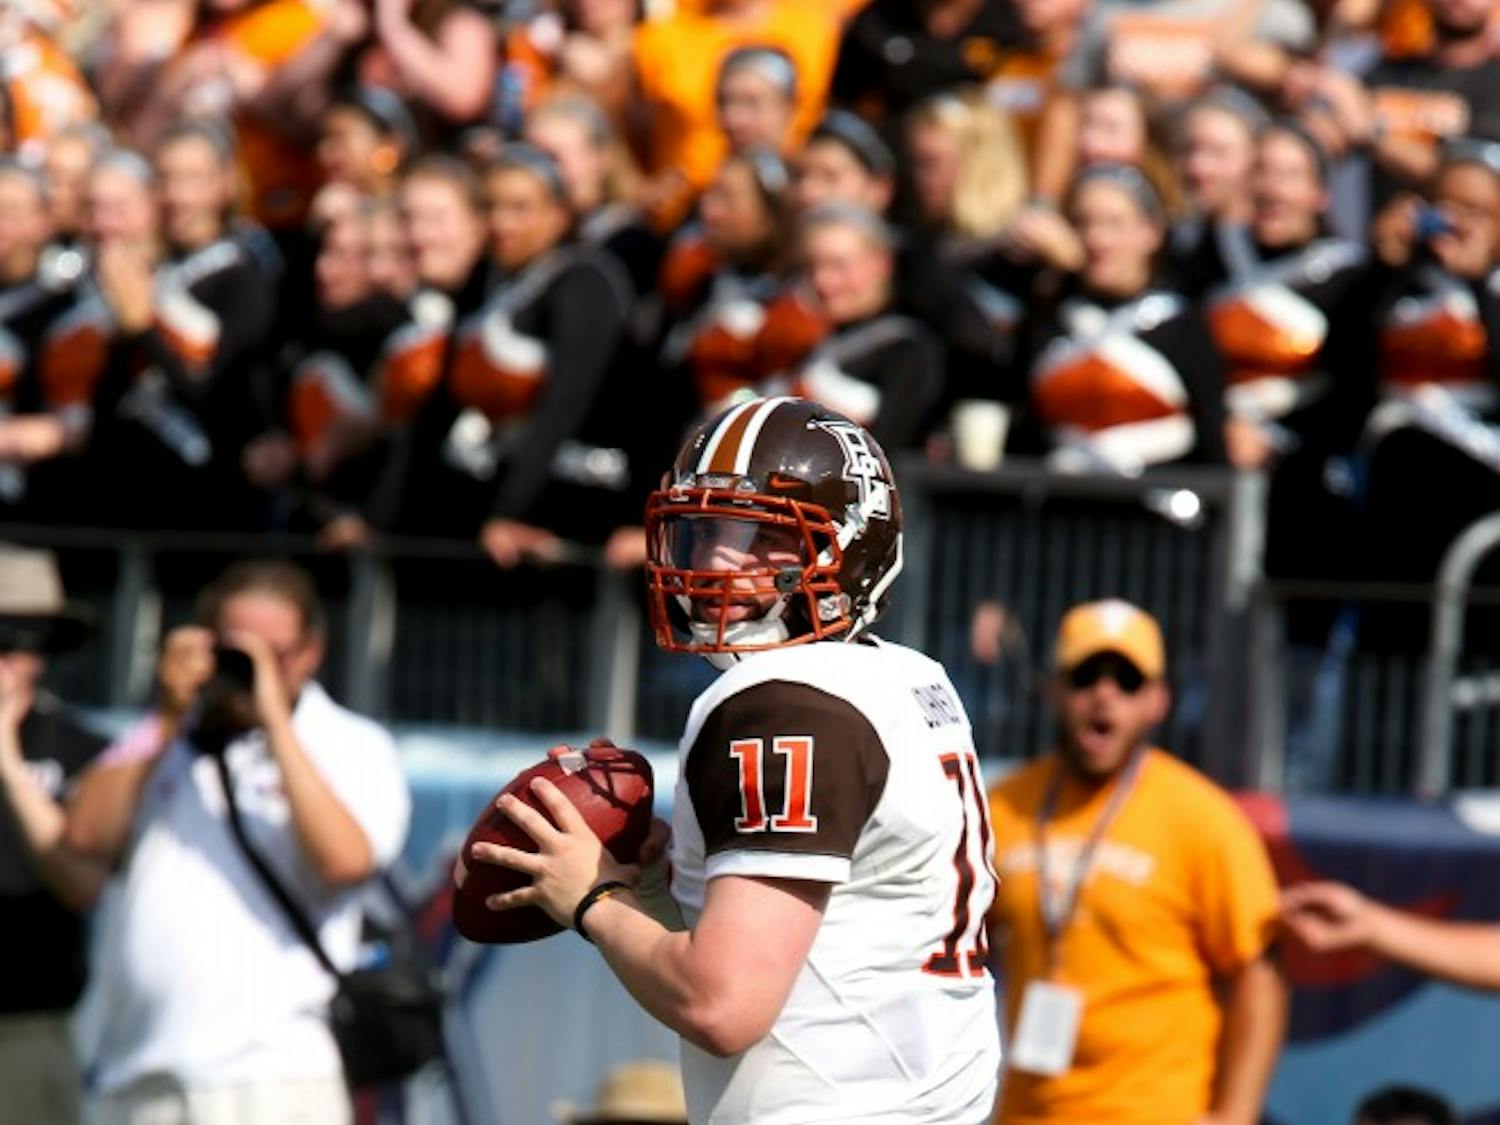 Senior quarterback Matt Johnson looks to complete the pass. Johnson leads the nation in passing yards with 1760.